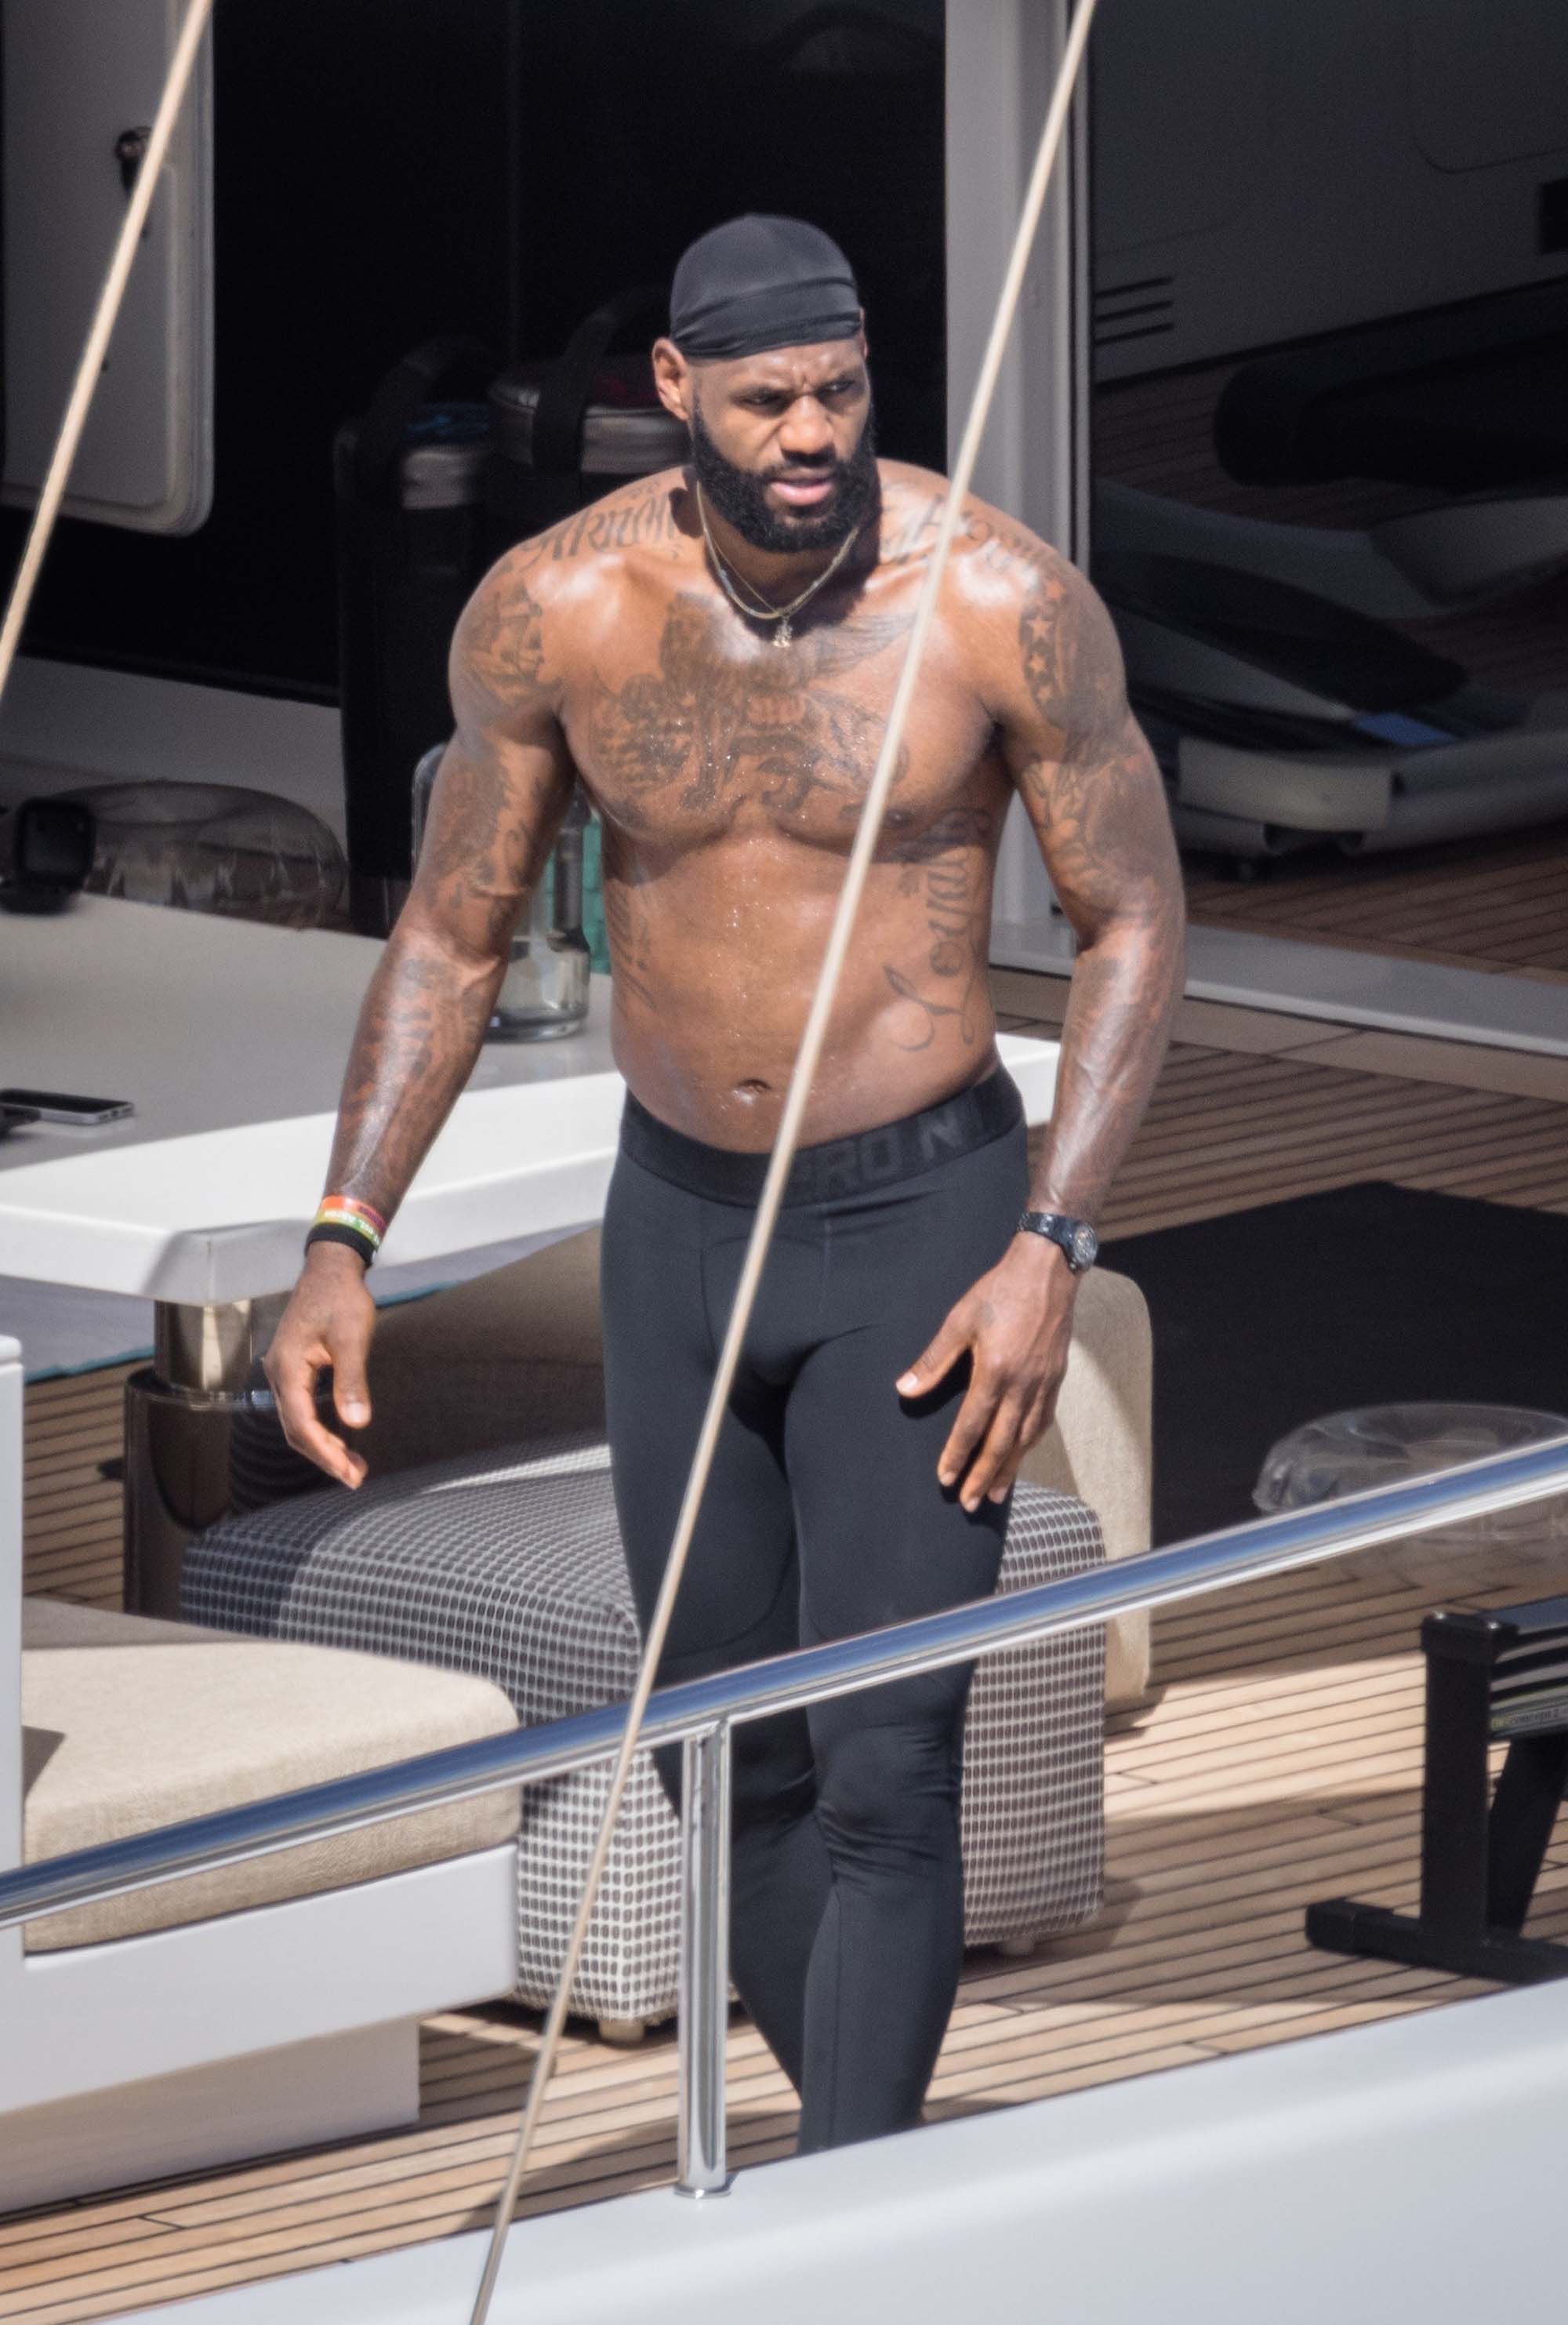 LeBron James works out in compression pants.